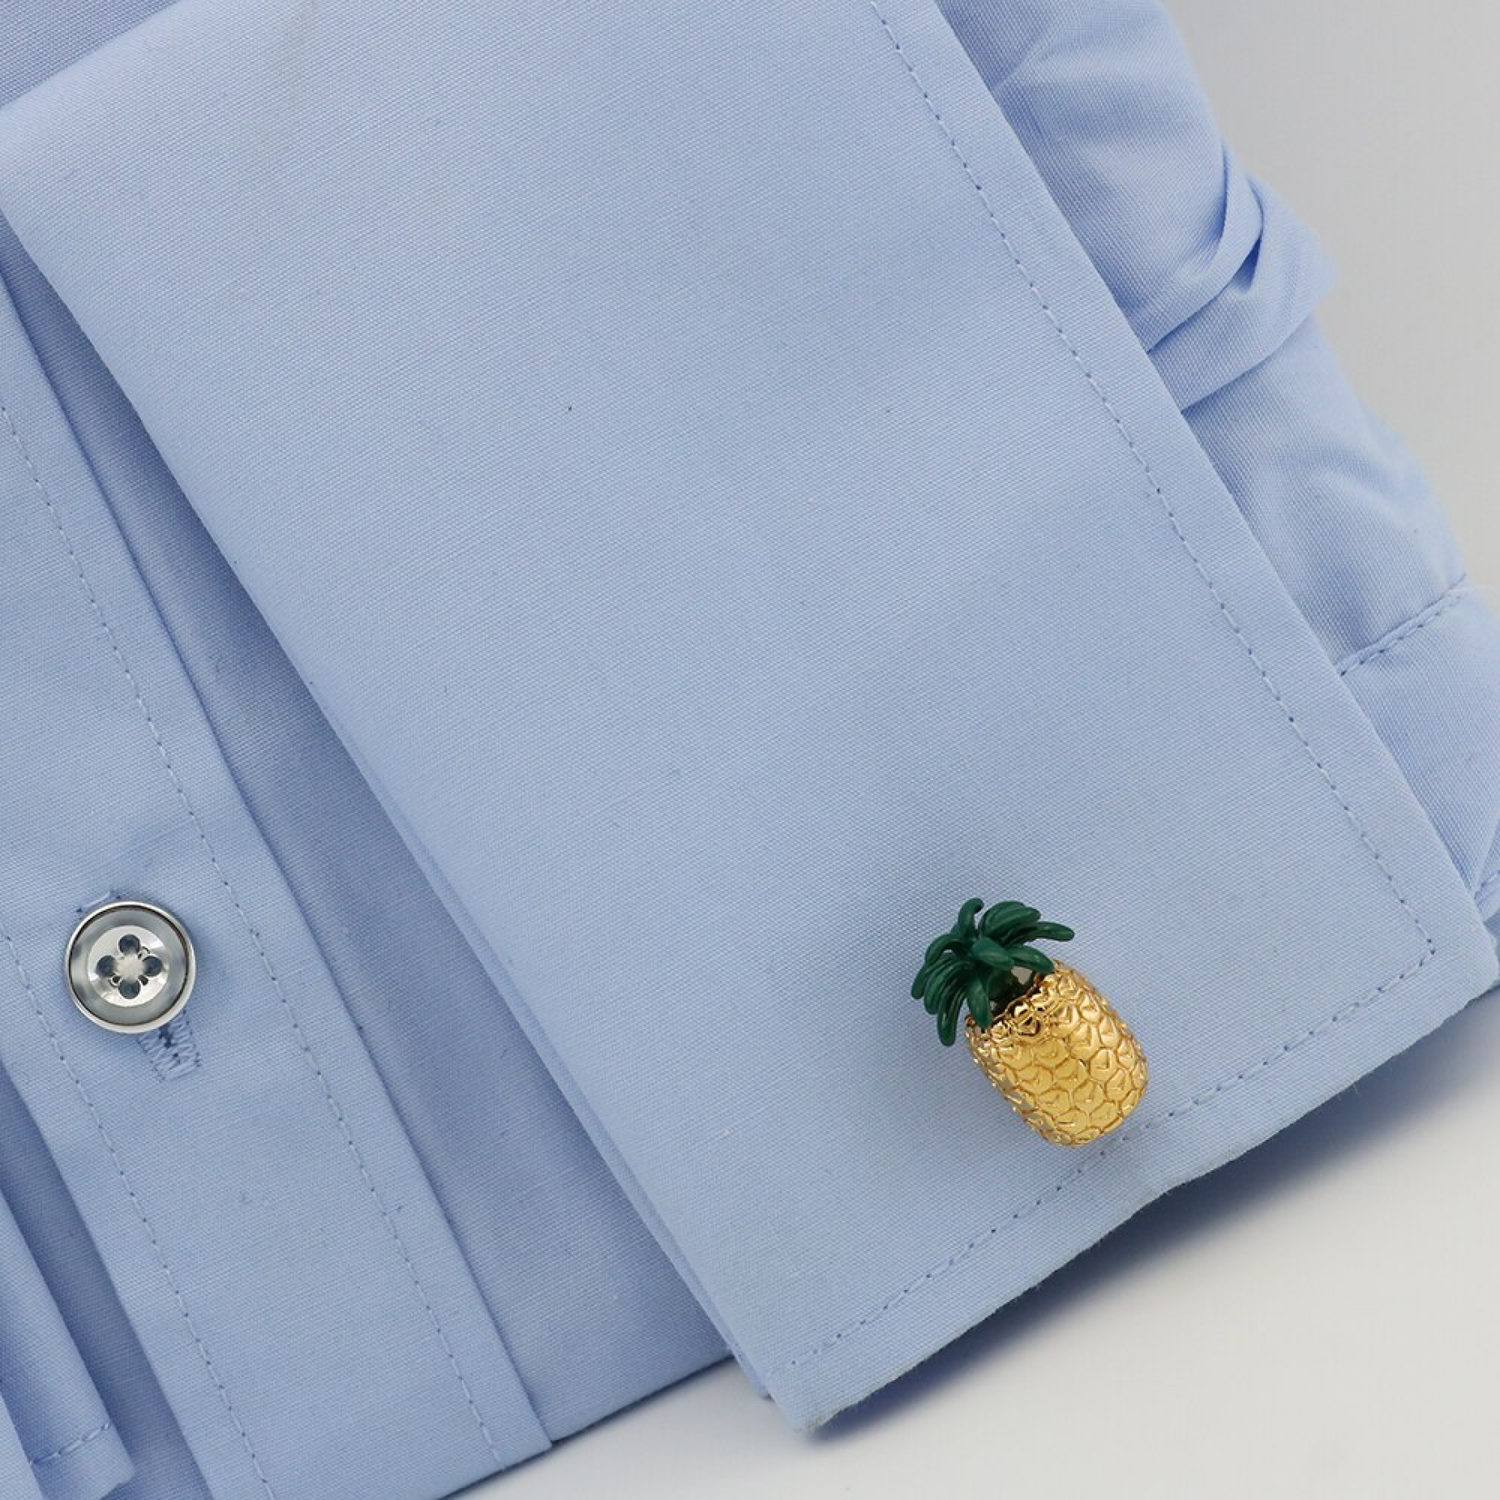 On Shirt Gold and Green Colored Pineapple Cufflinks